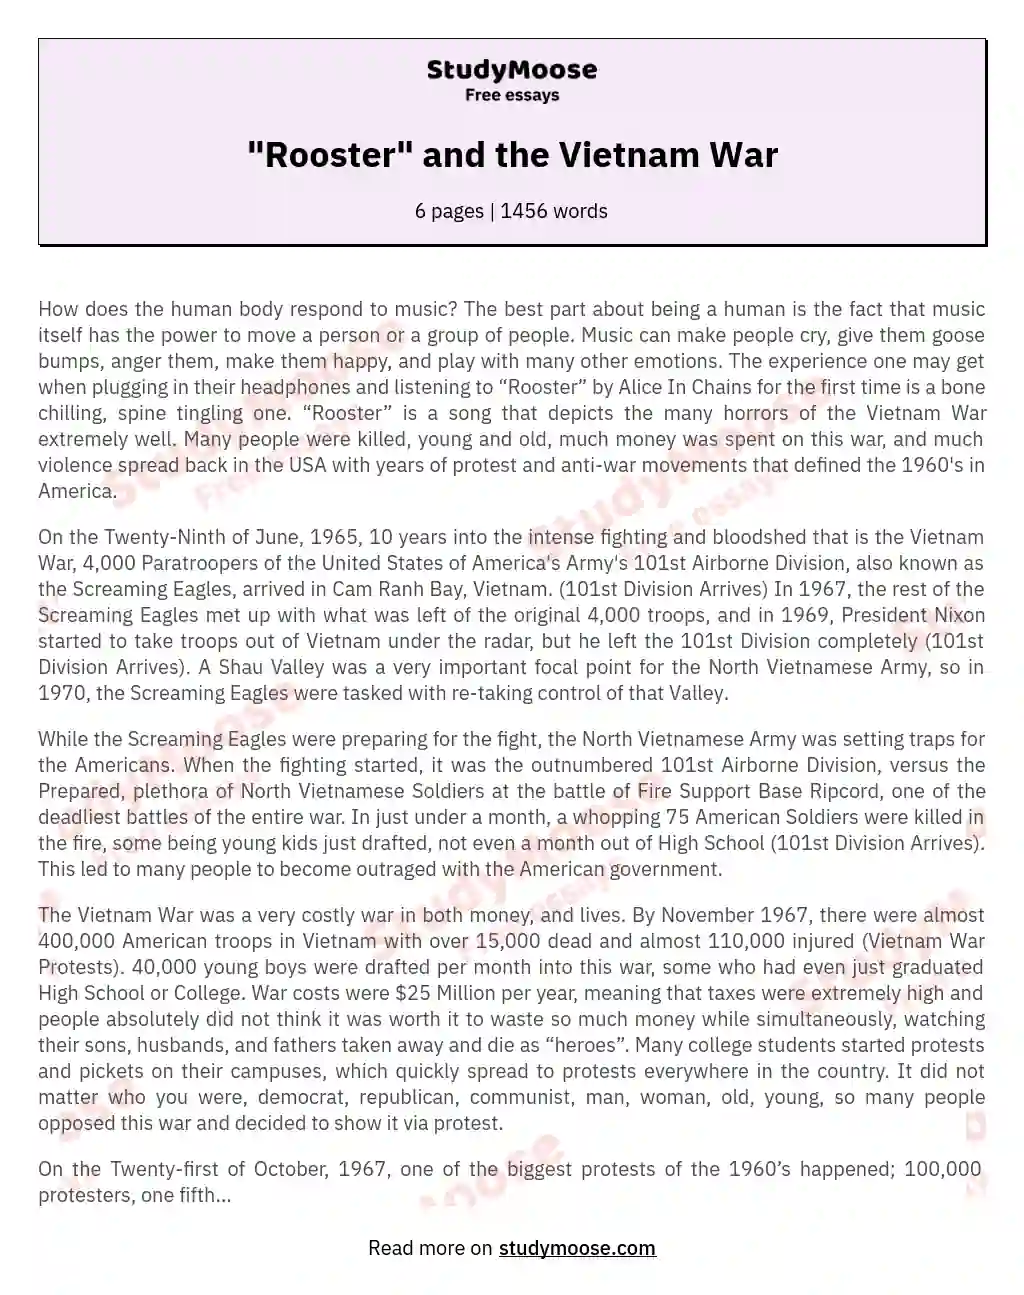 "Rooster" and the Vietnam War essay